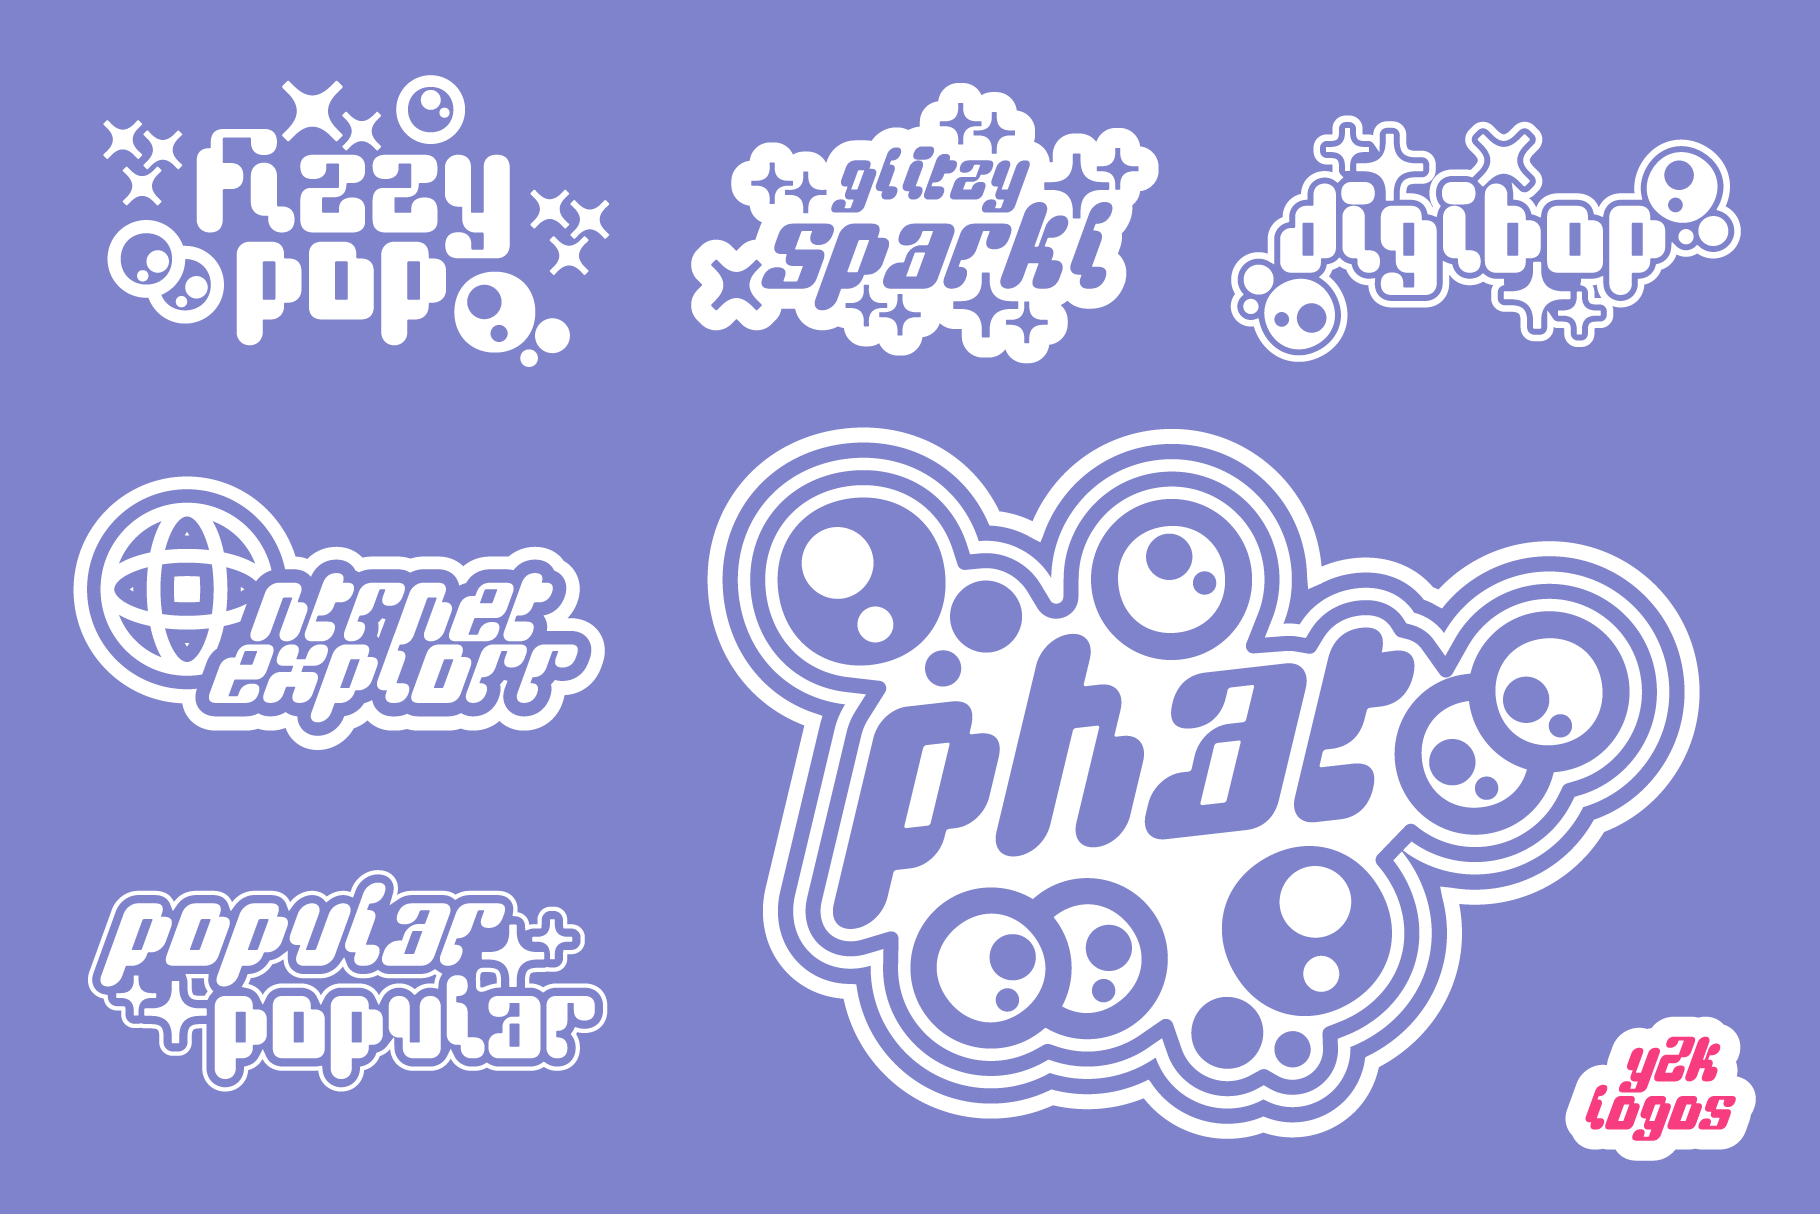 6 logos using DigiBop Font on a purple background